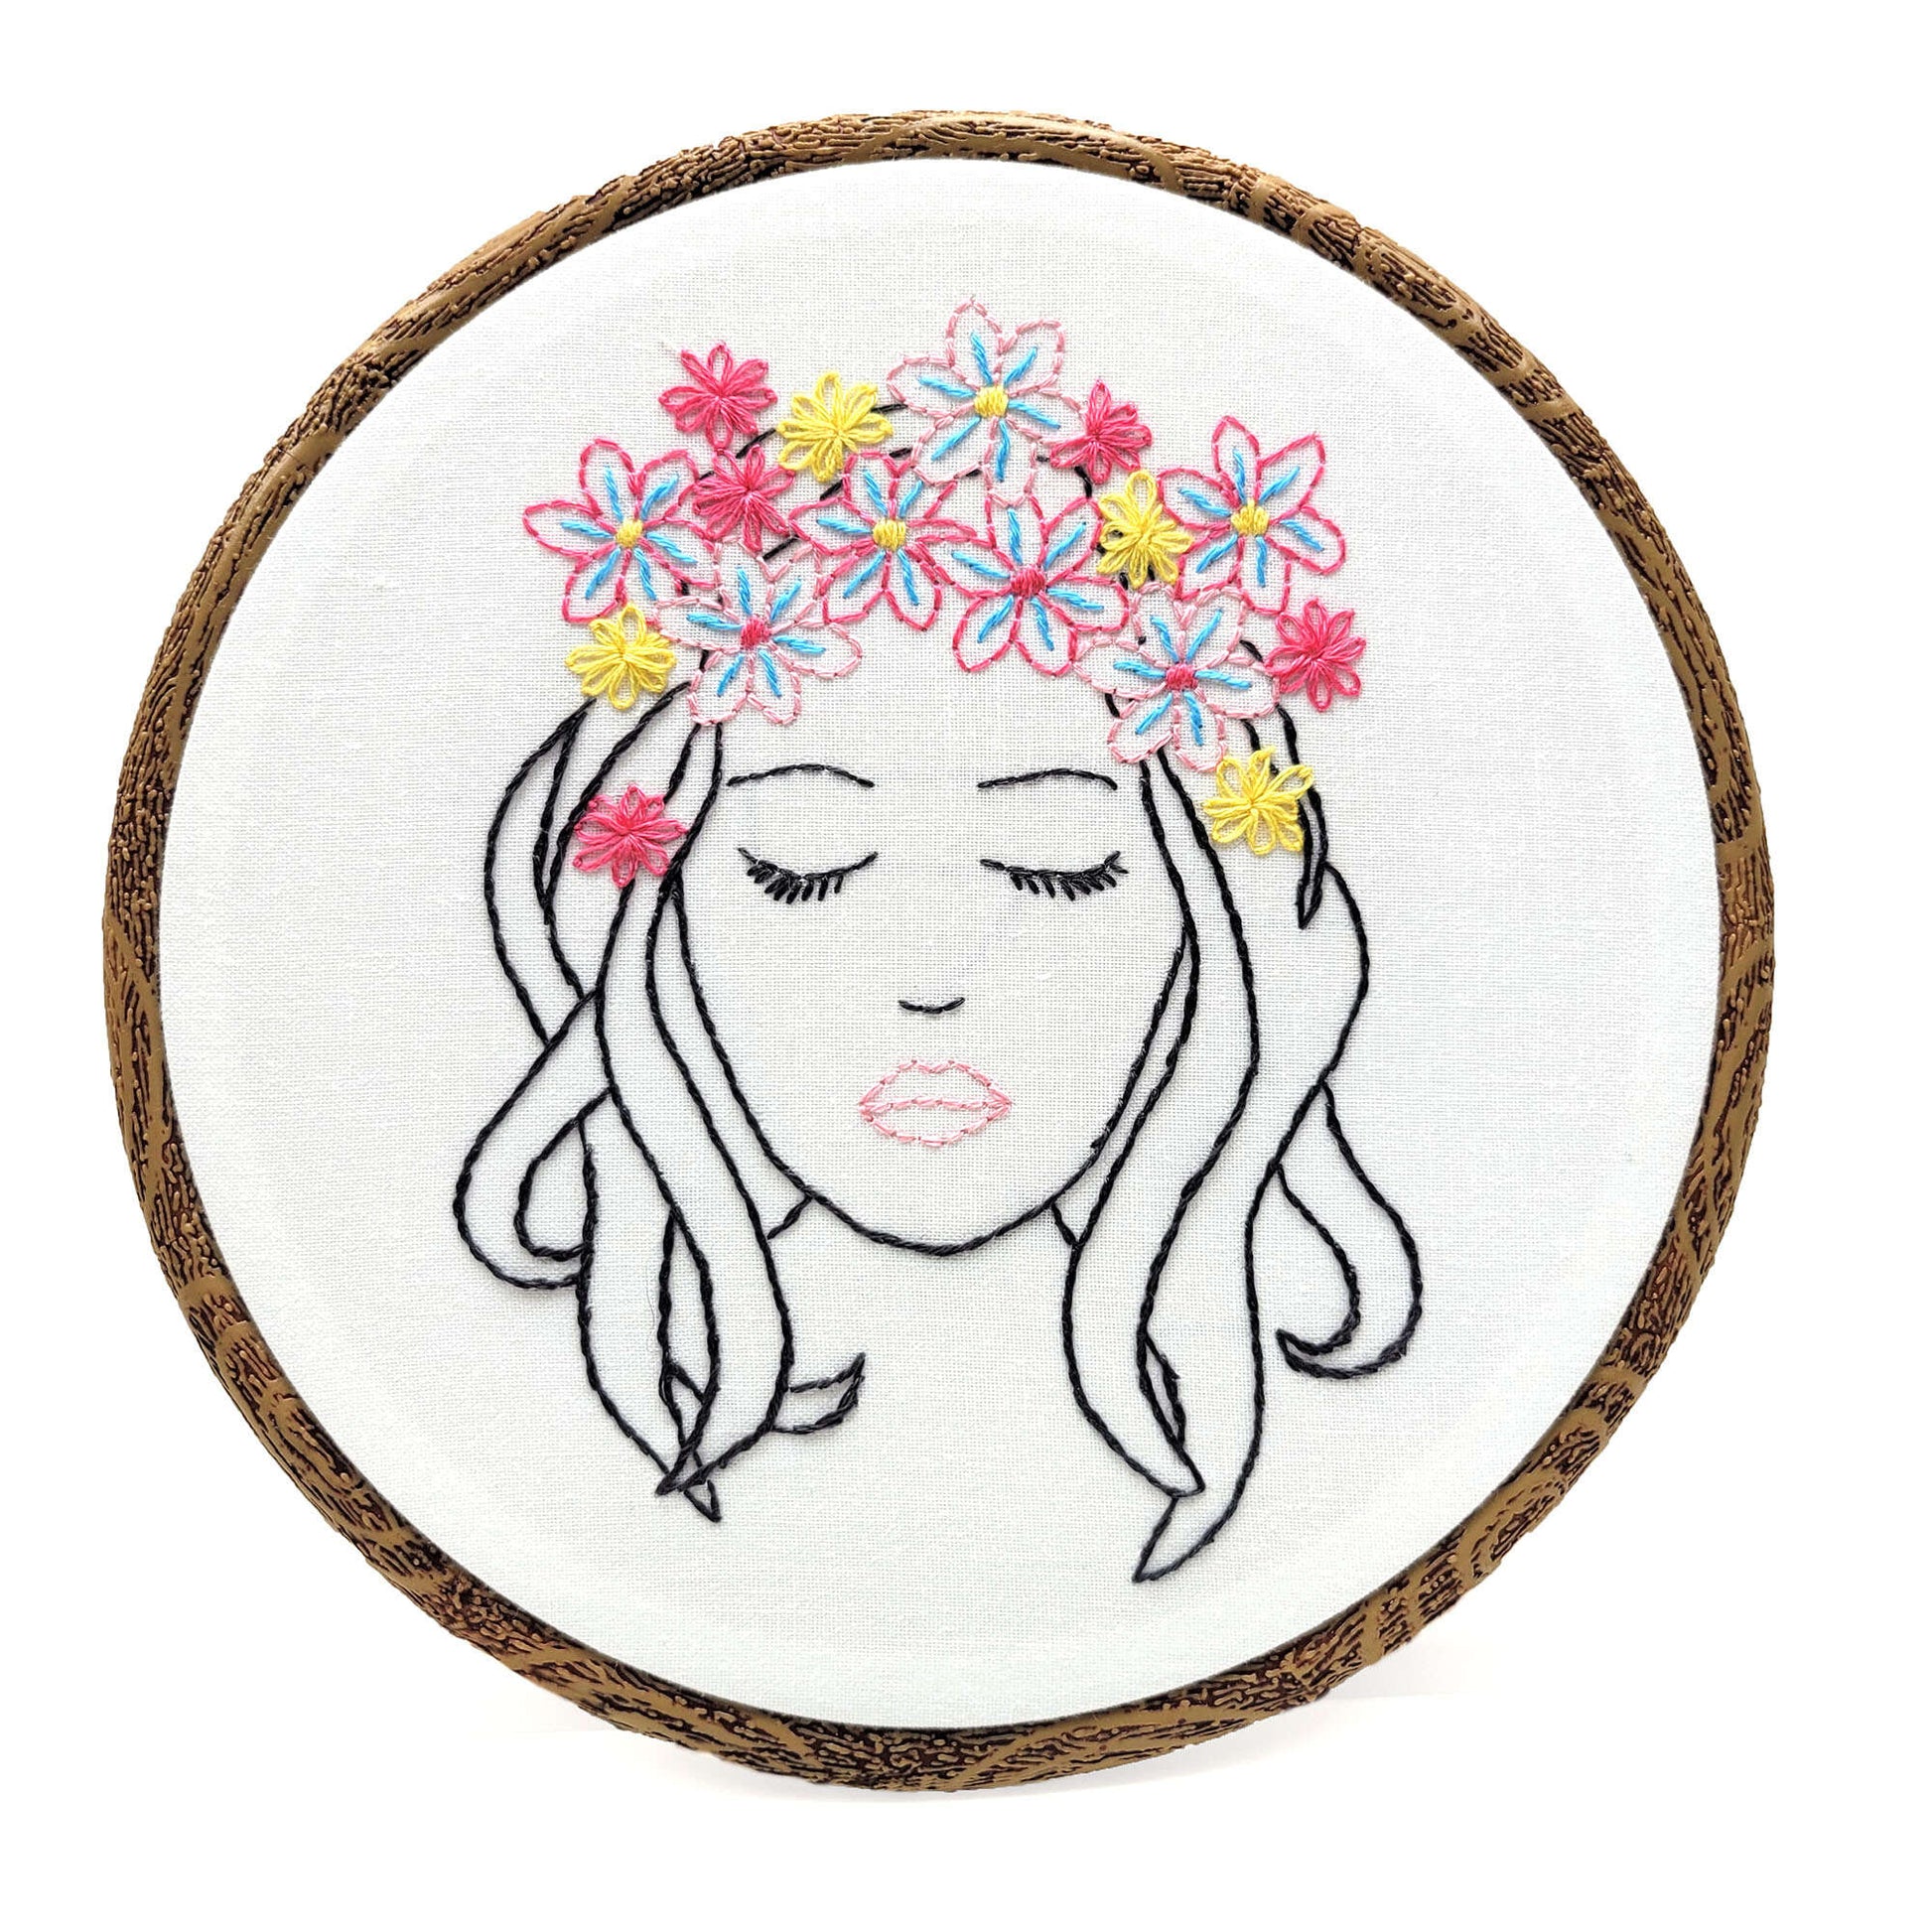 8 Step-by-Step Embroidery Tutorials for Beginners and Beyond